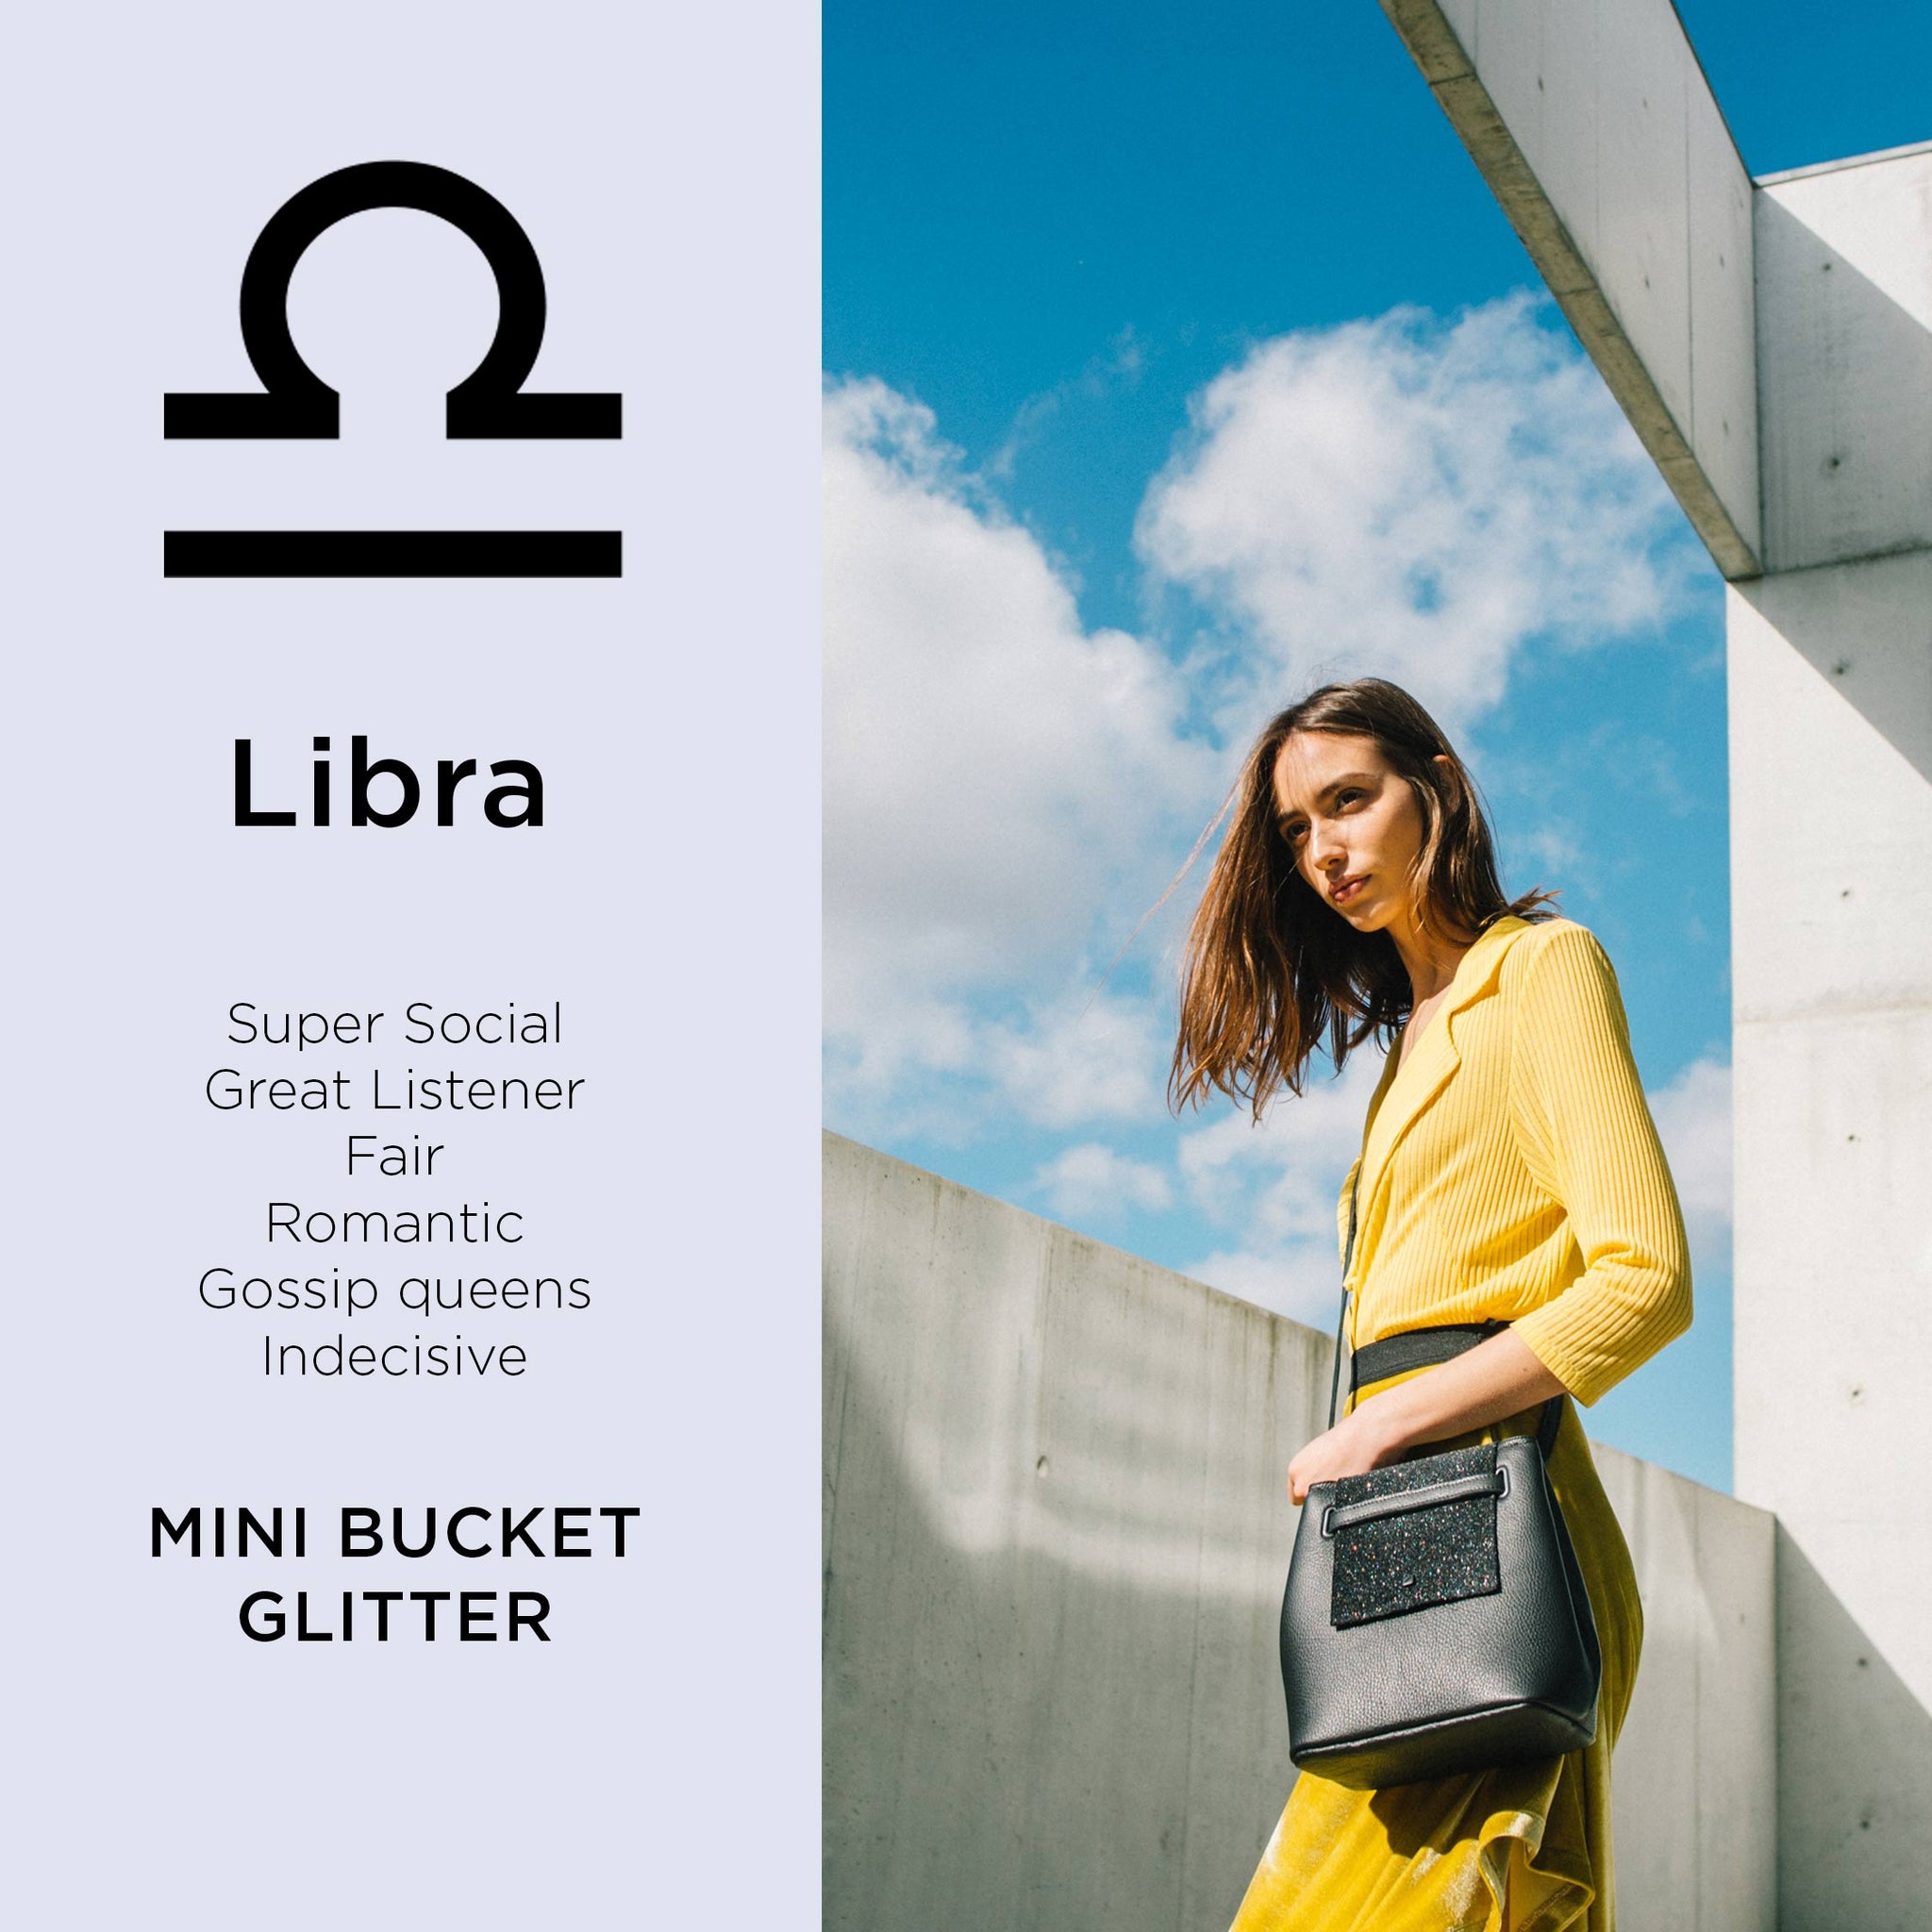 The perfect bag for the Libra Woman!